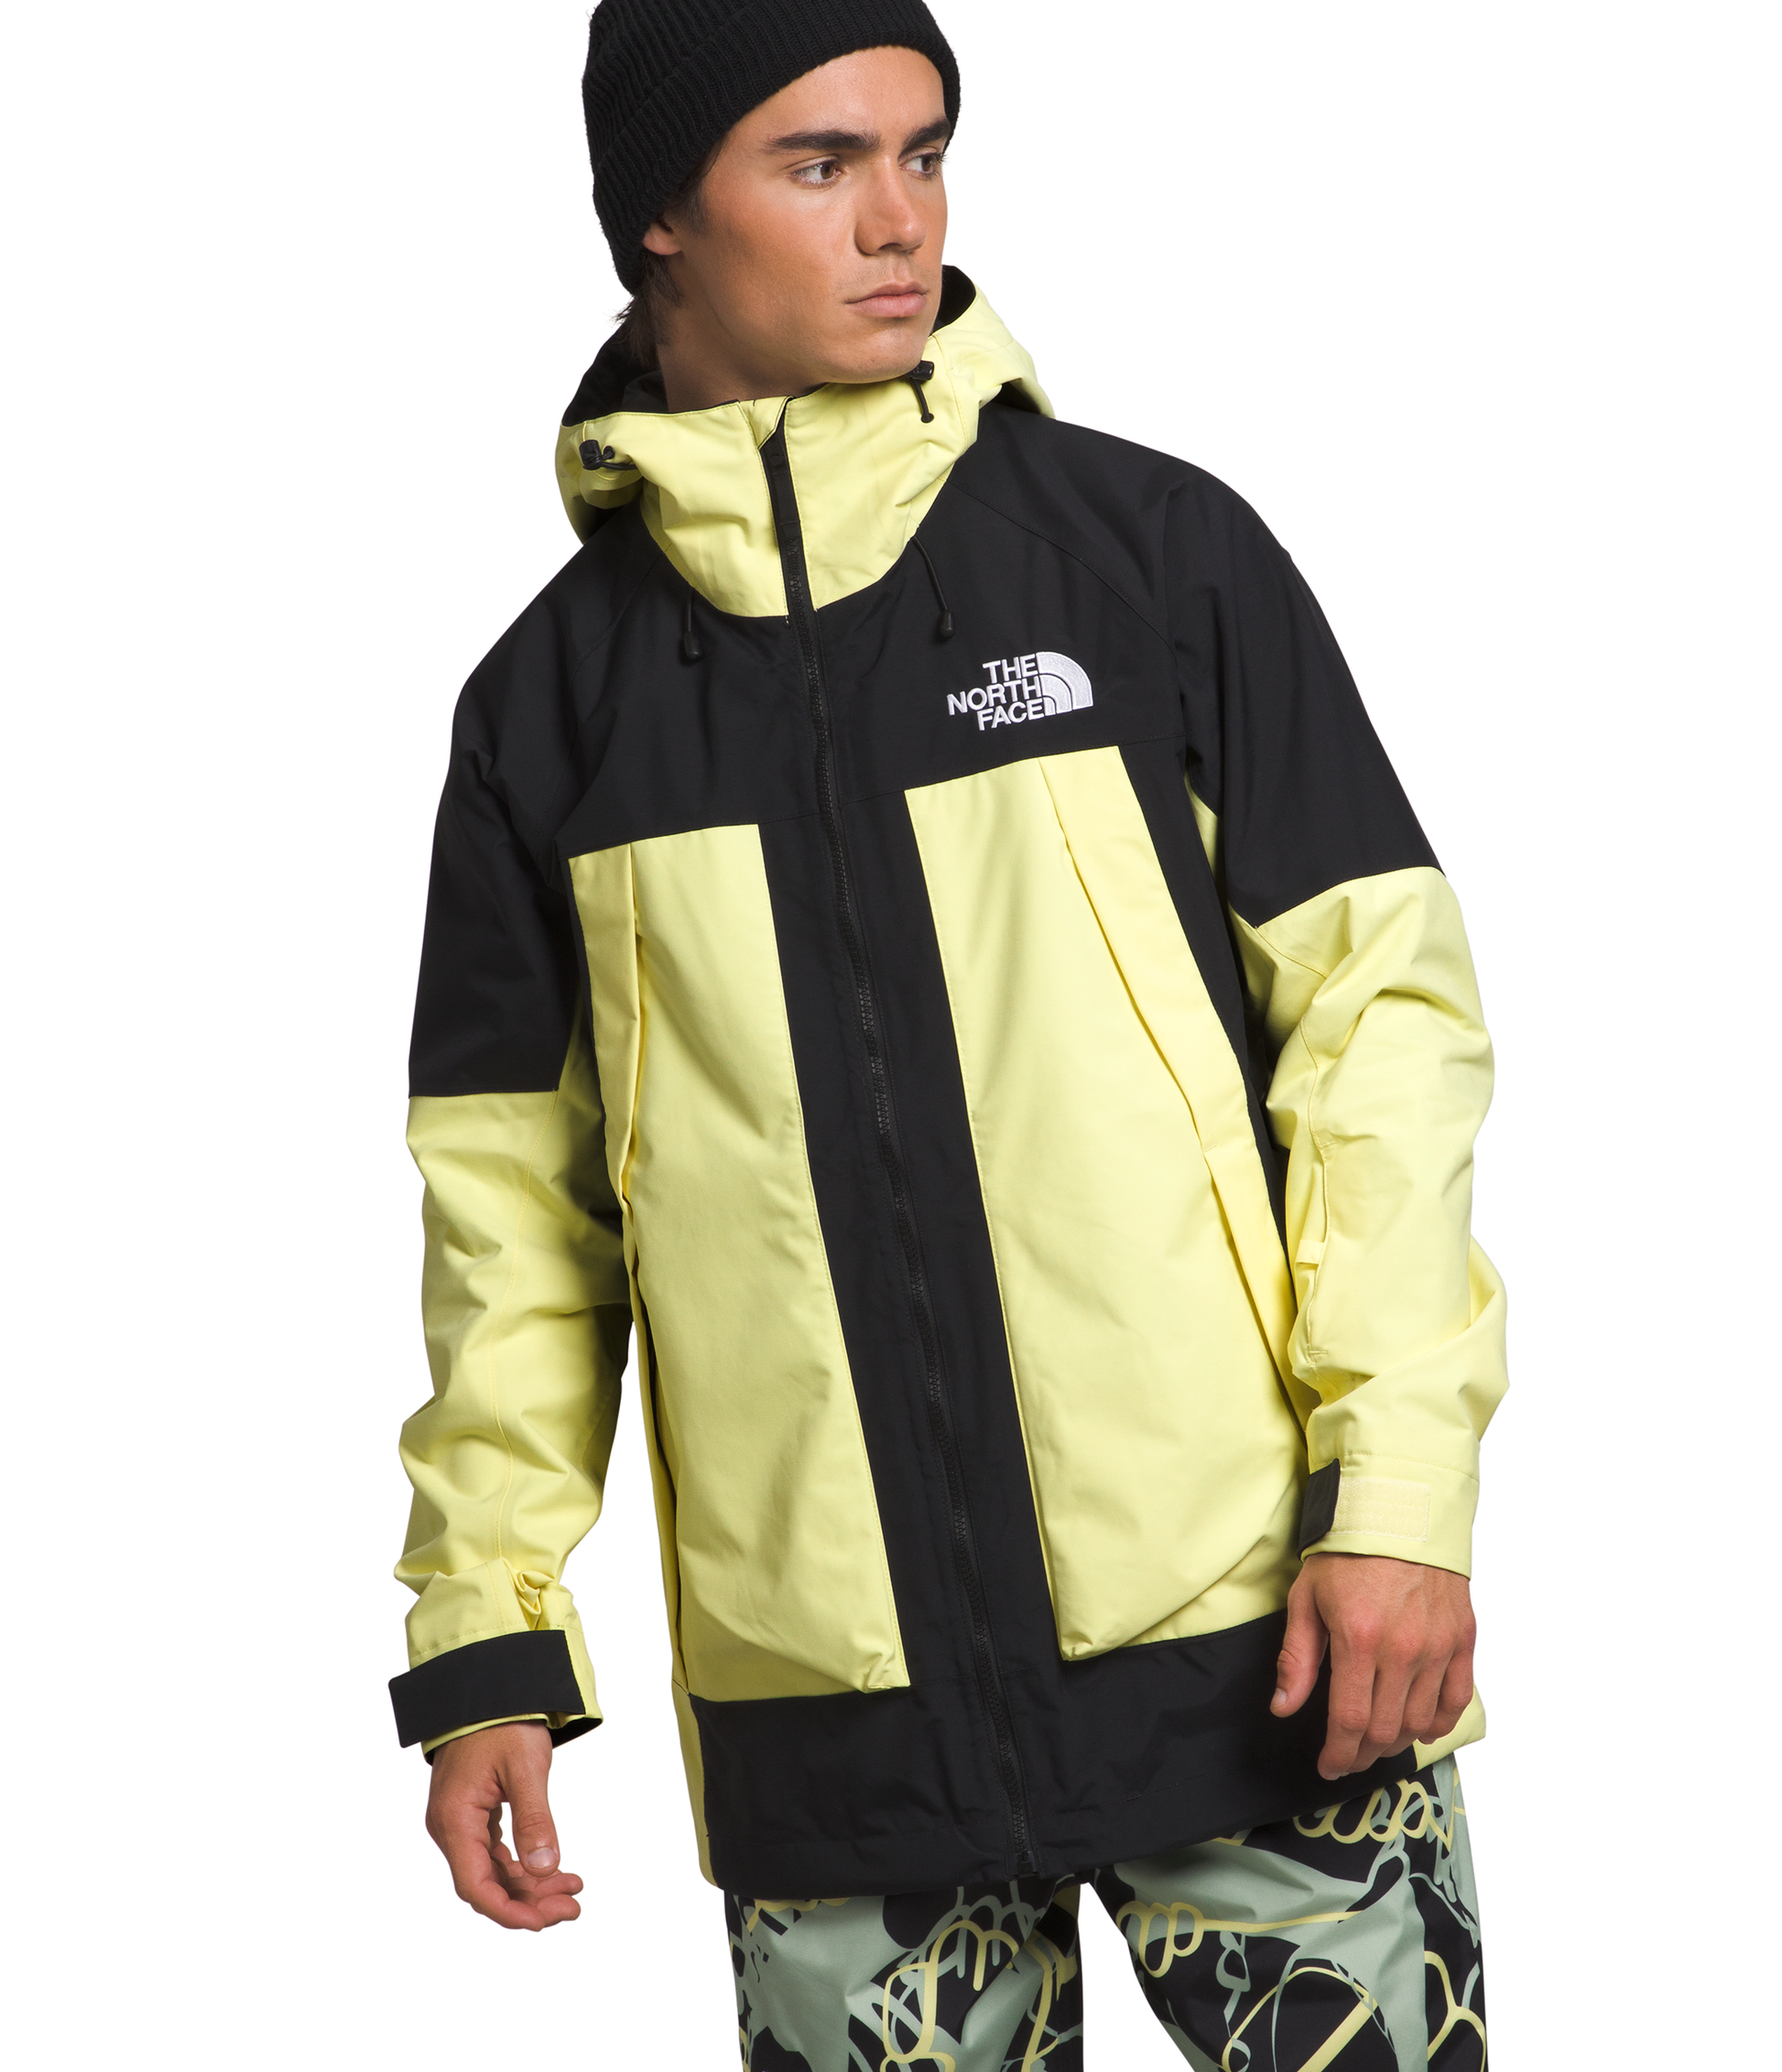 The North Face – The Ski Chalet